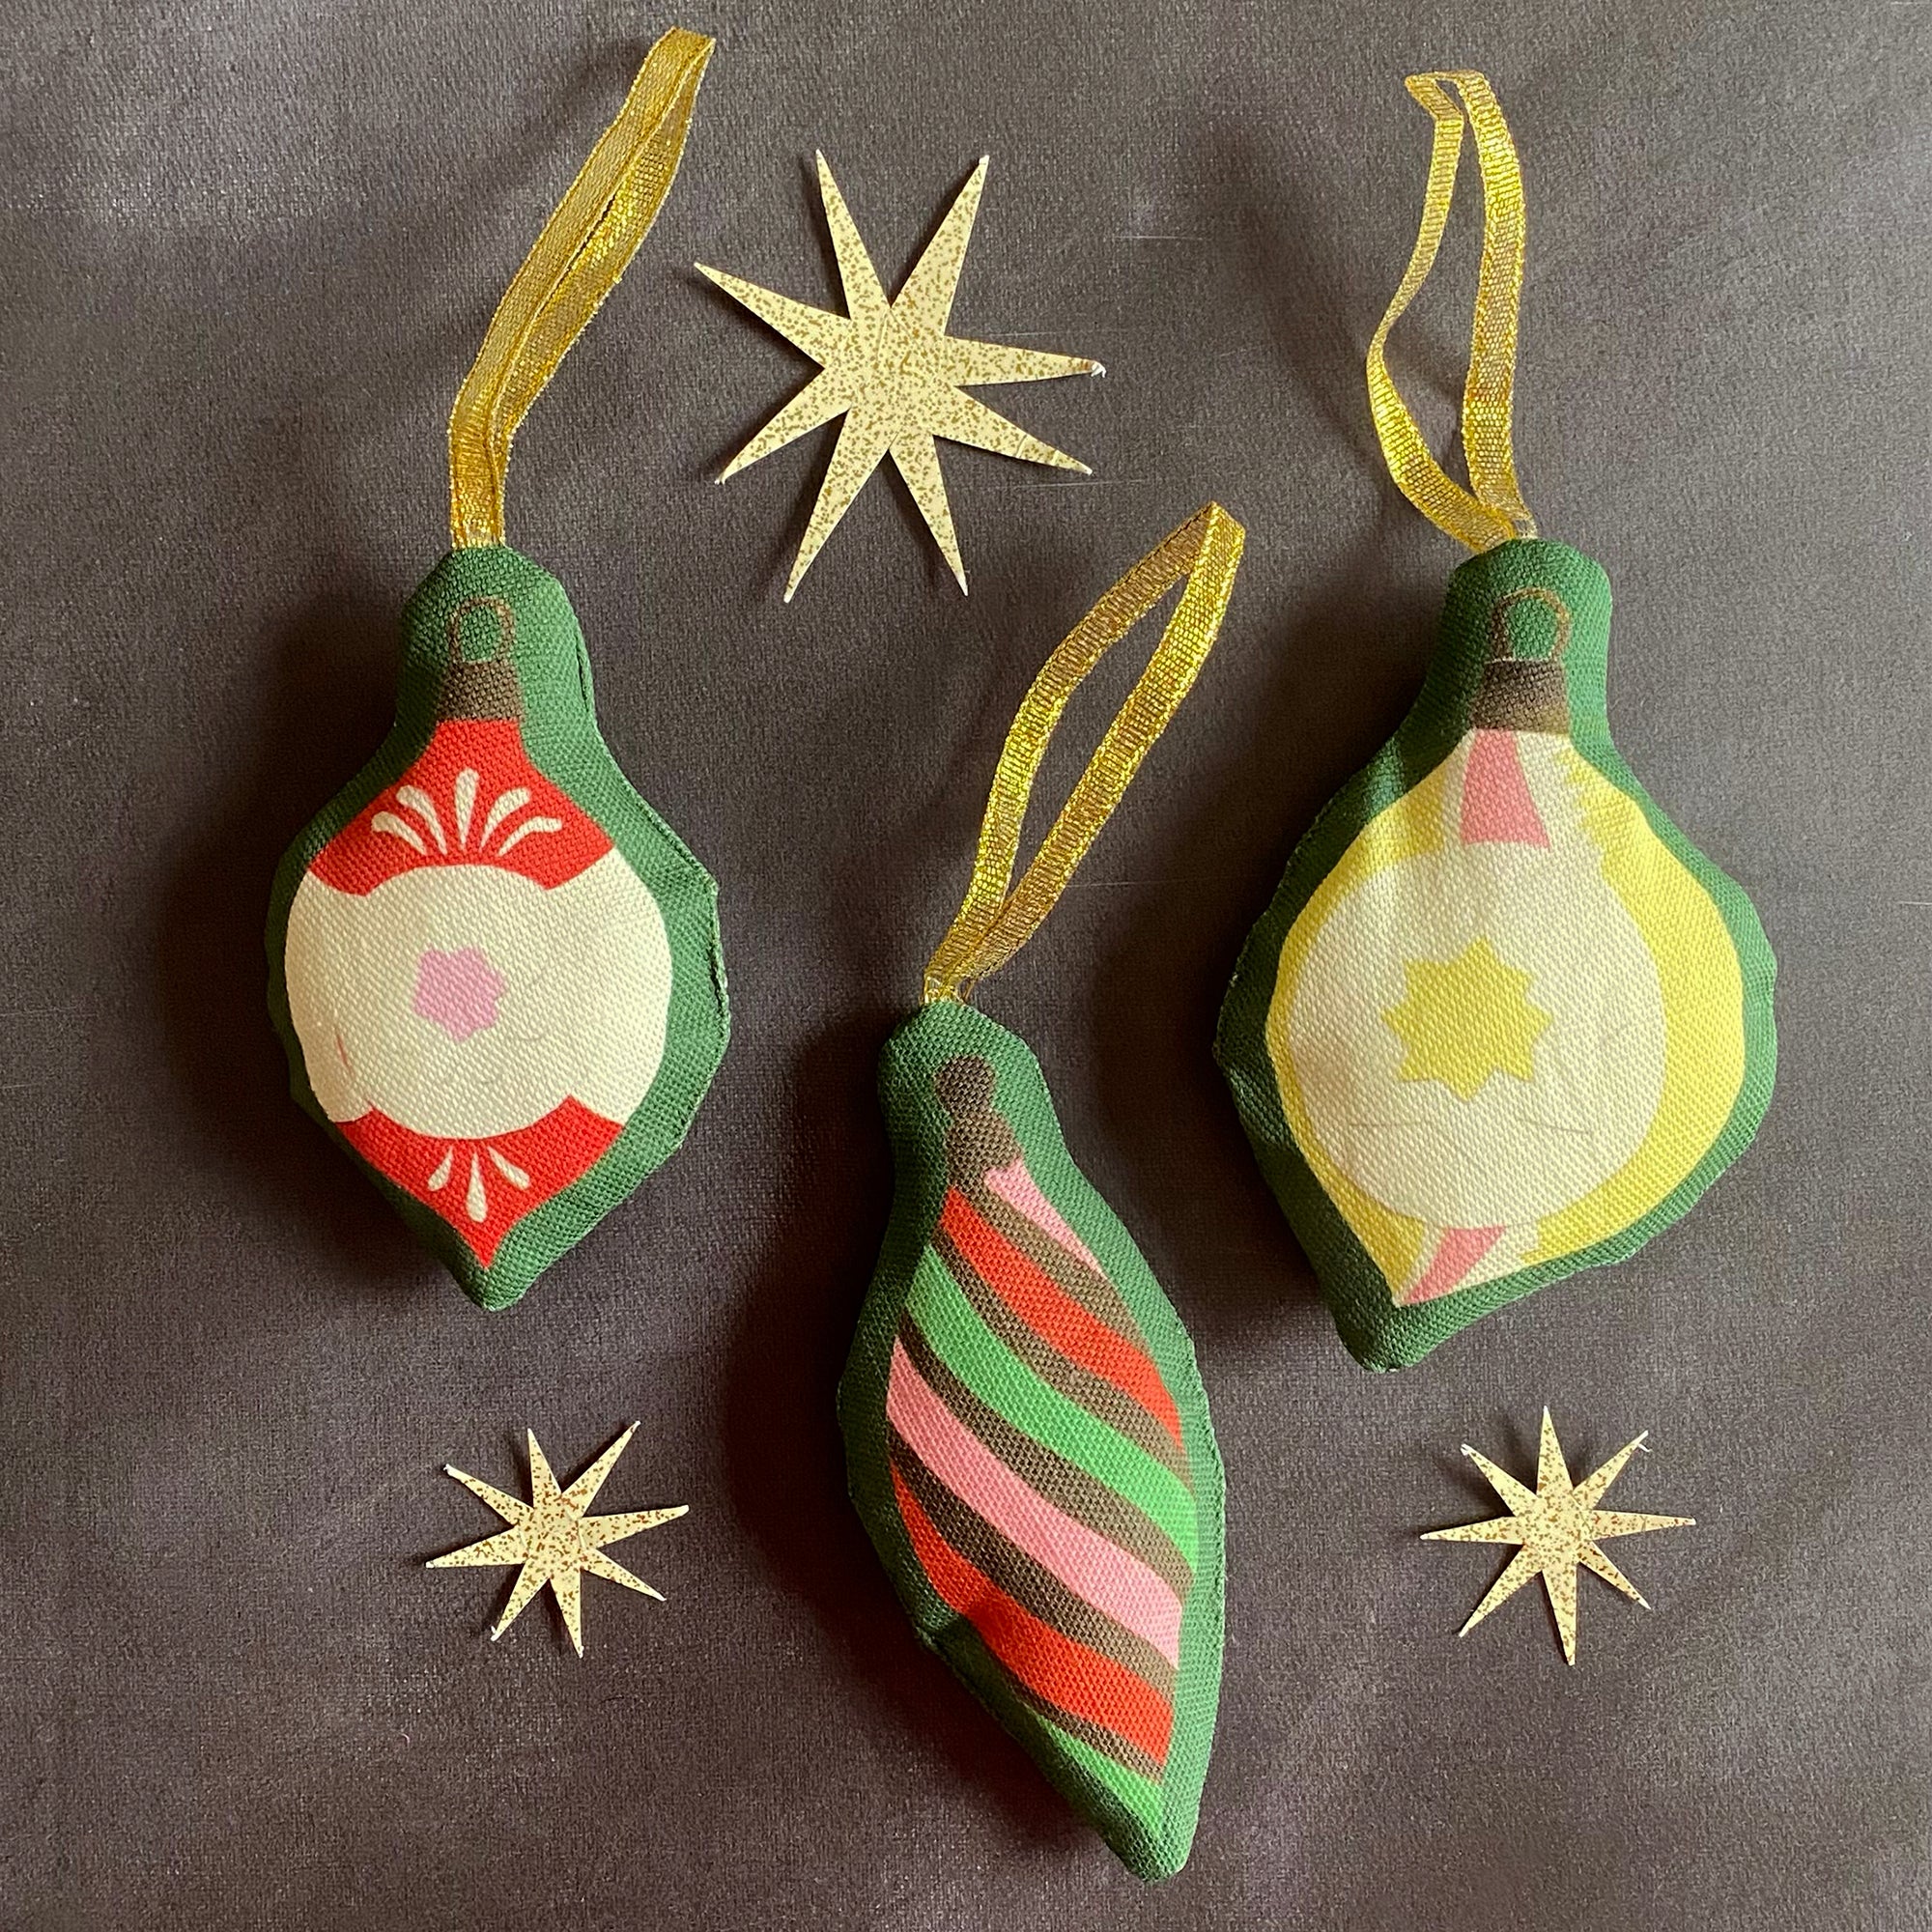 Vintage Bauble Christmas Tree Decorations | Single or set of 3